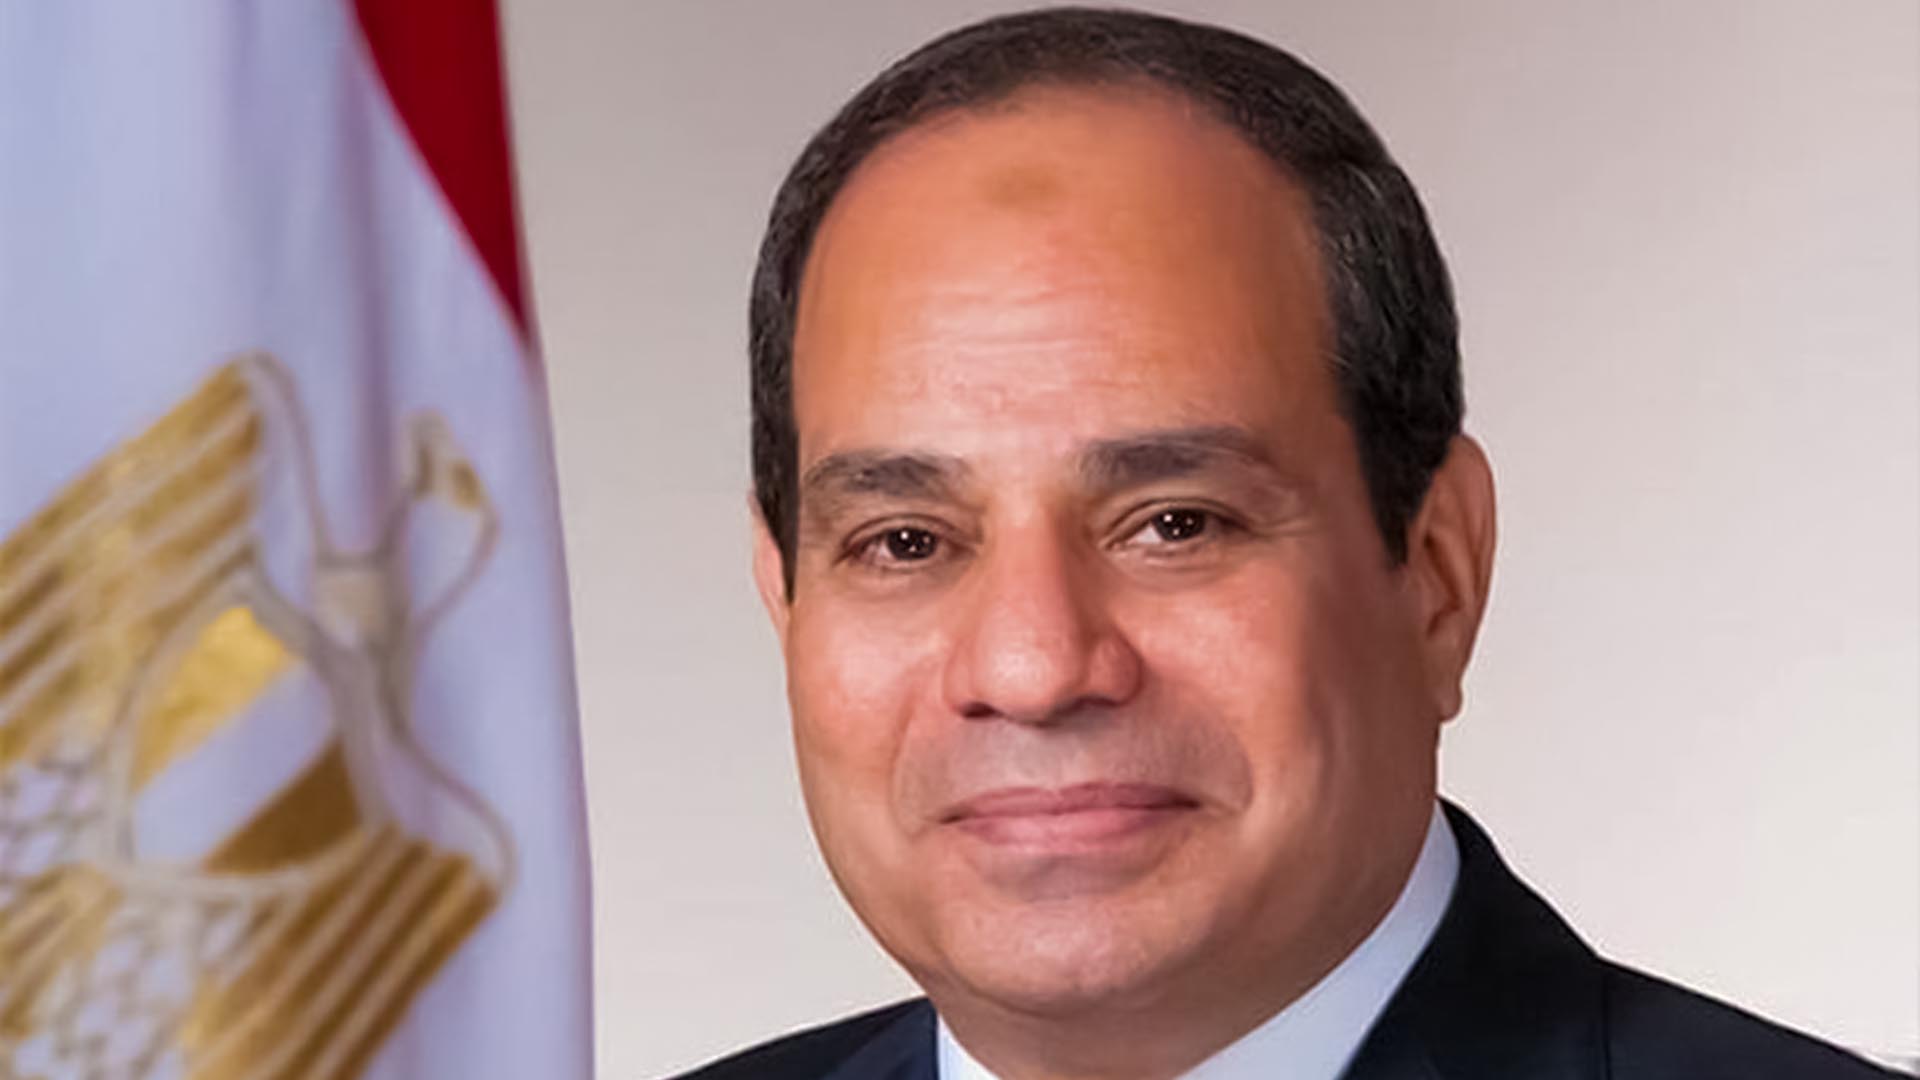 Egyptian President El Sisi to visit Oman on official visit